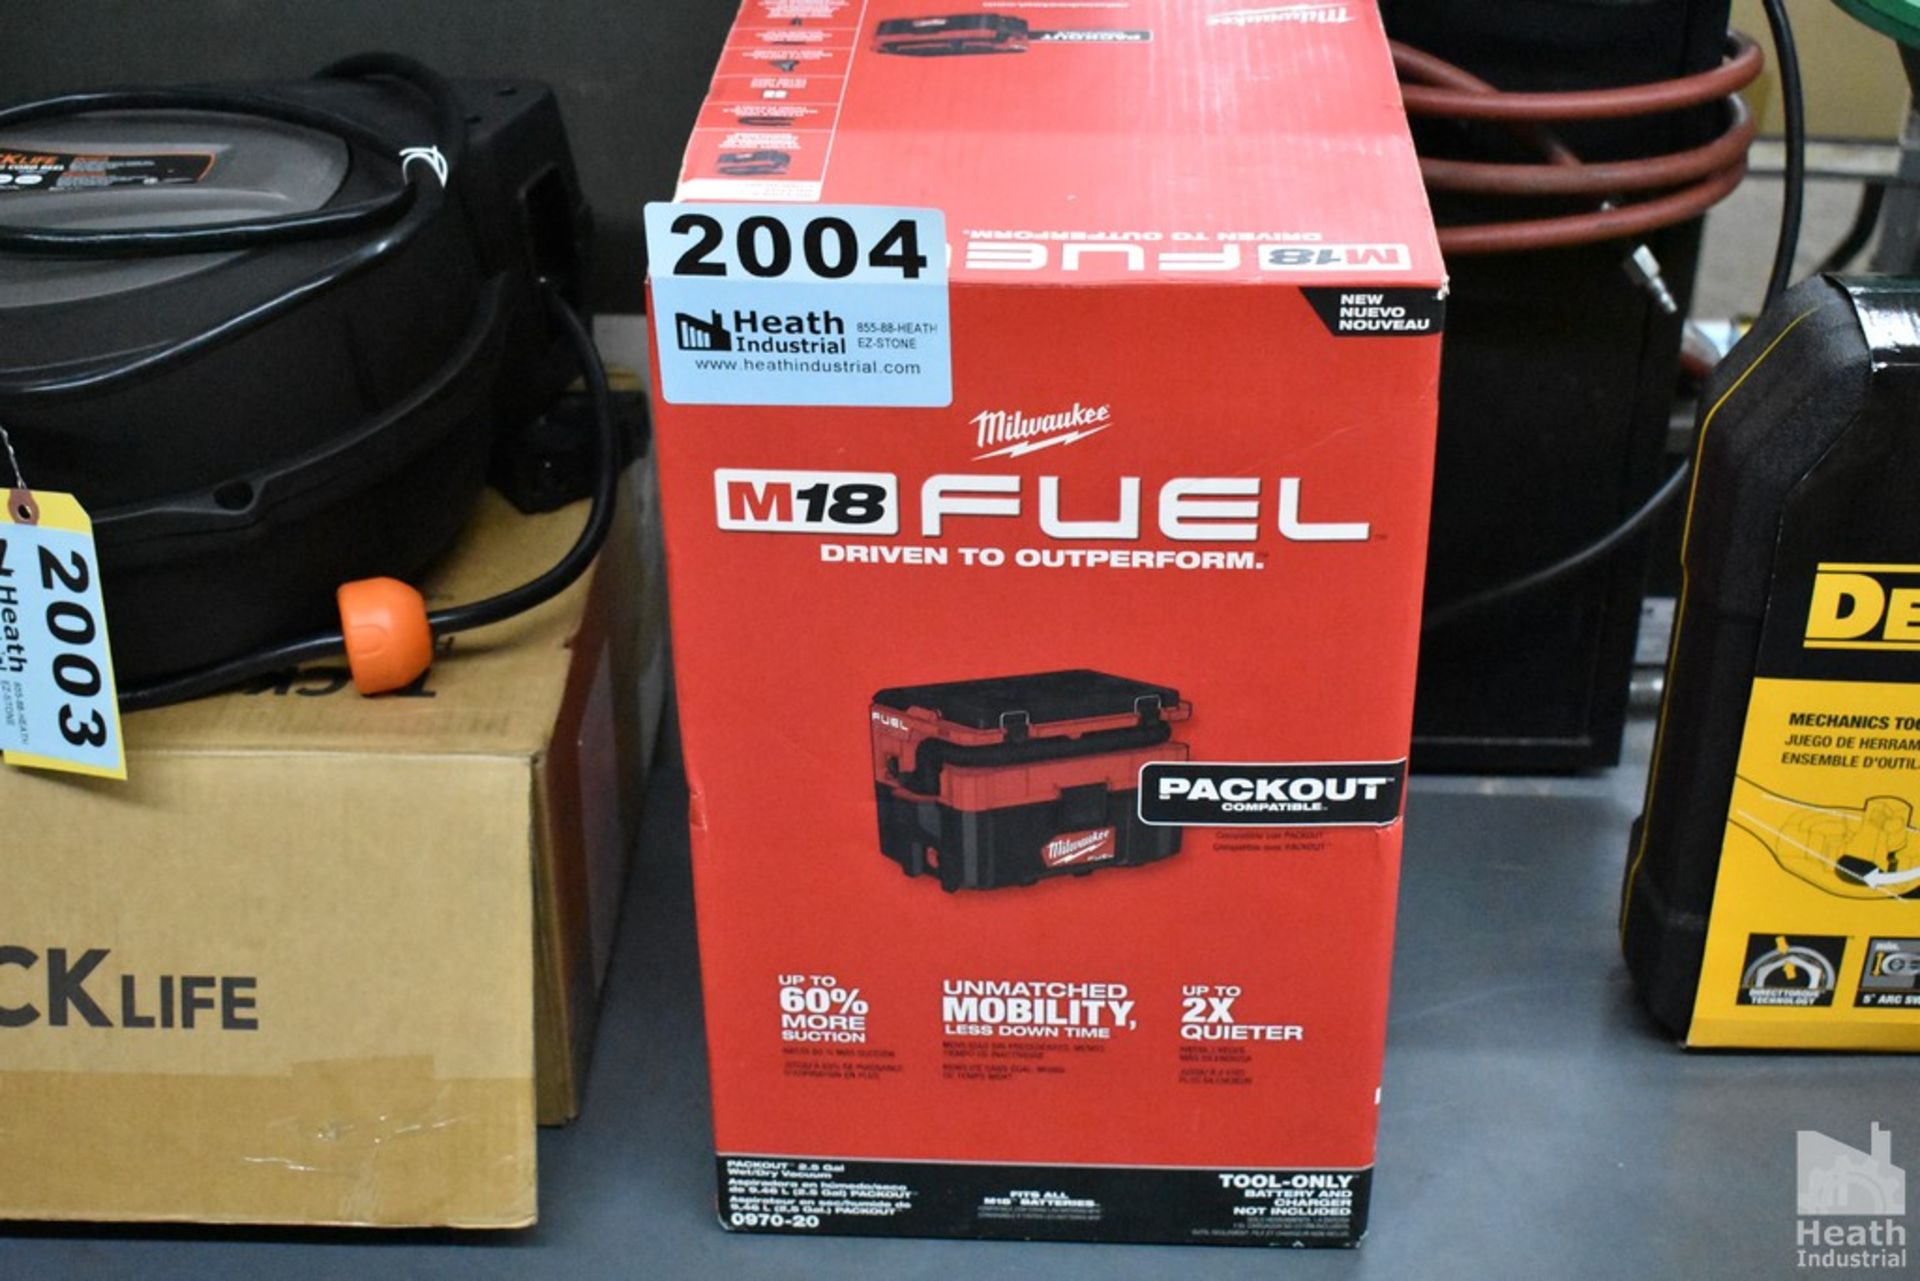 MILWAUKEE M18 FUEL PACKOUT WET/DRY VACUUM, 2.5-GAL., MODEL 0970-20, TOOL ONLY, NEW IN BOX